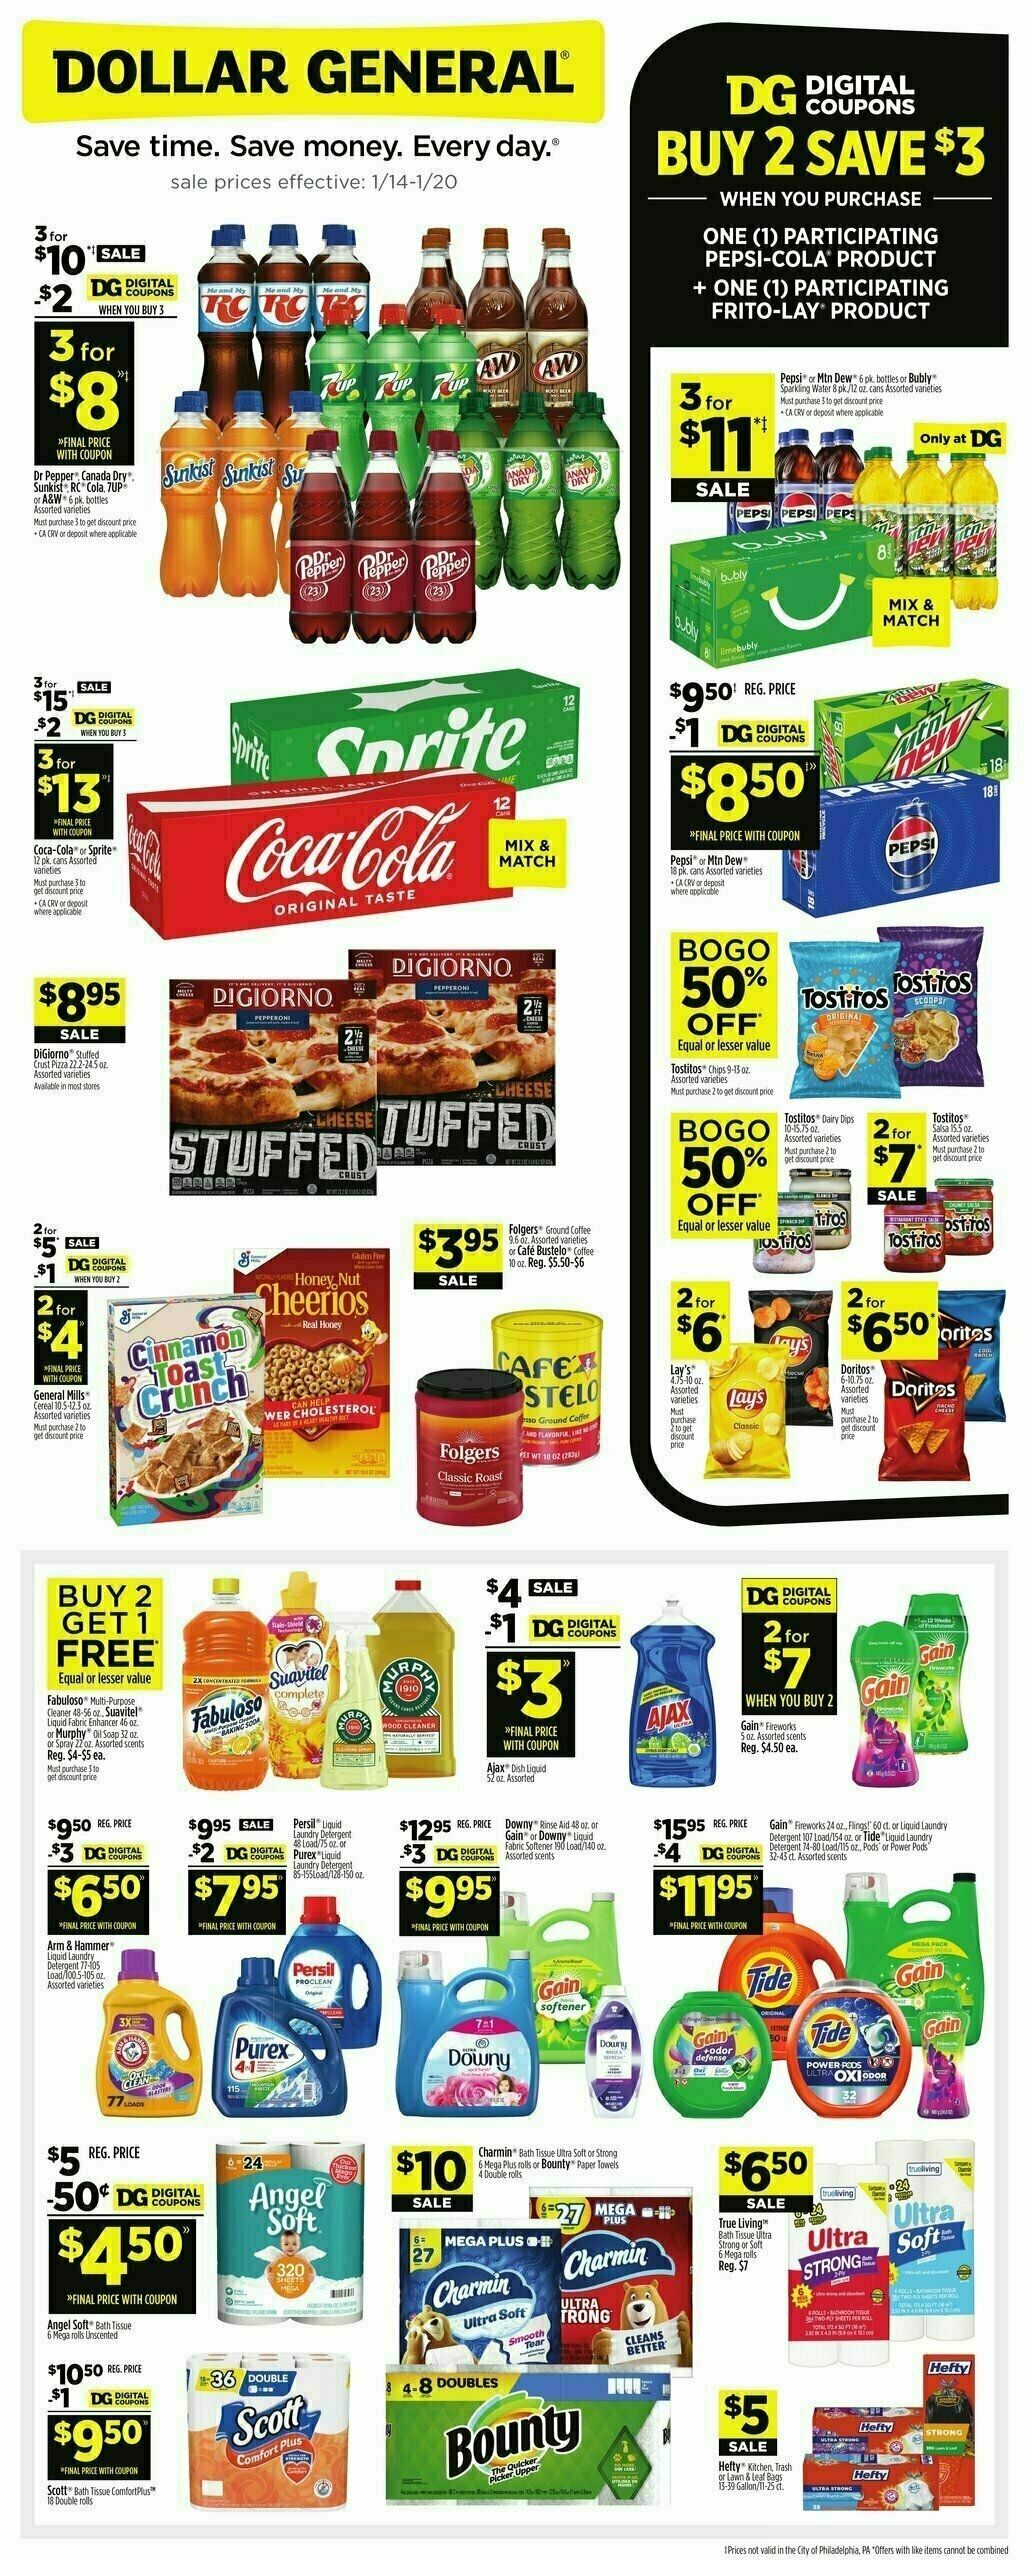 Dollar General Weekly Ad from January 14